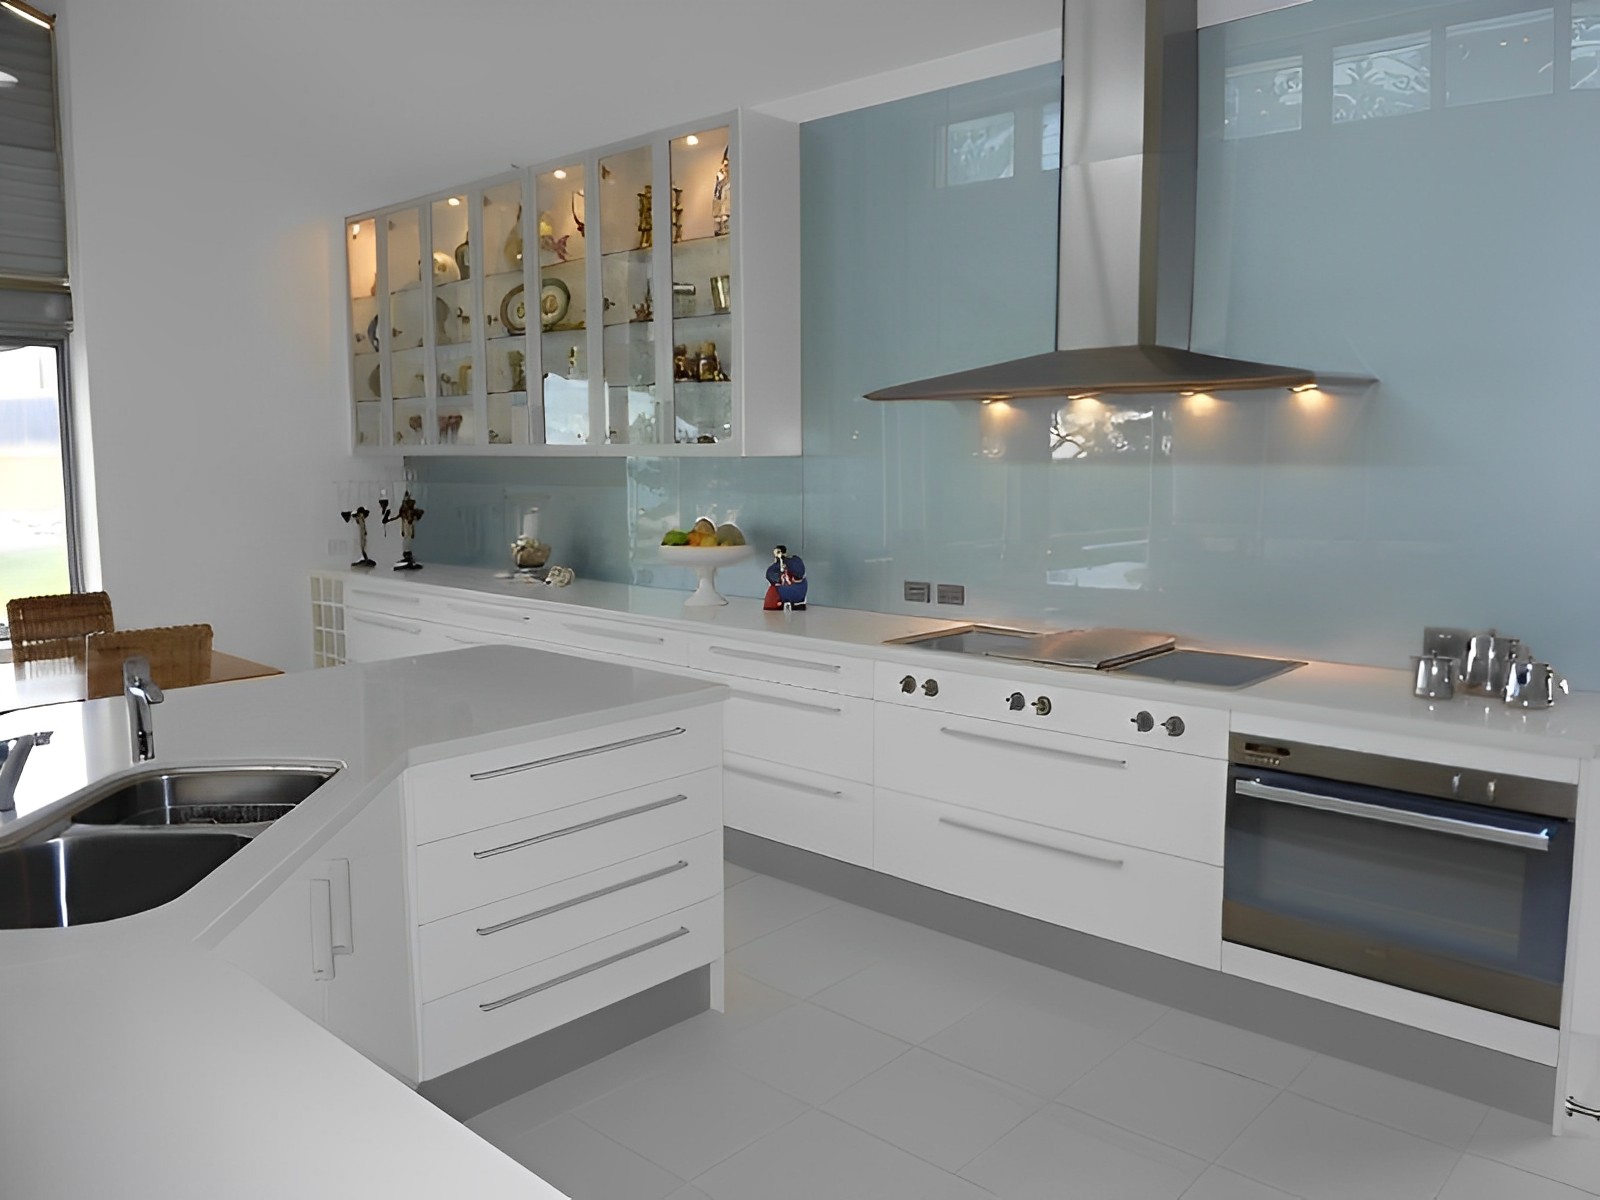 Image of a kitchen after undergoing a Kitchen Renovation